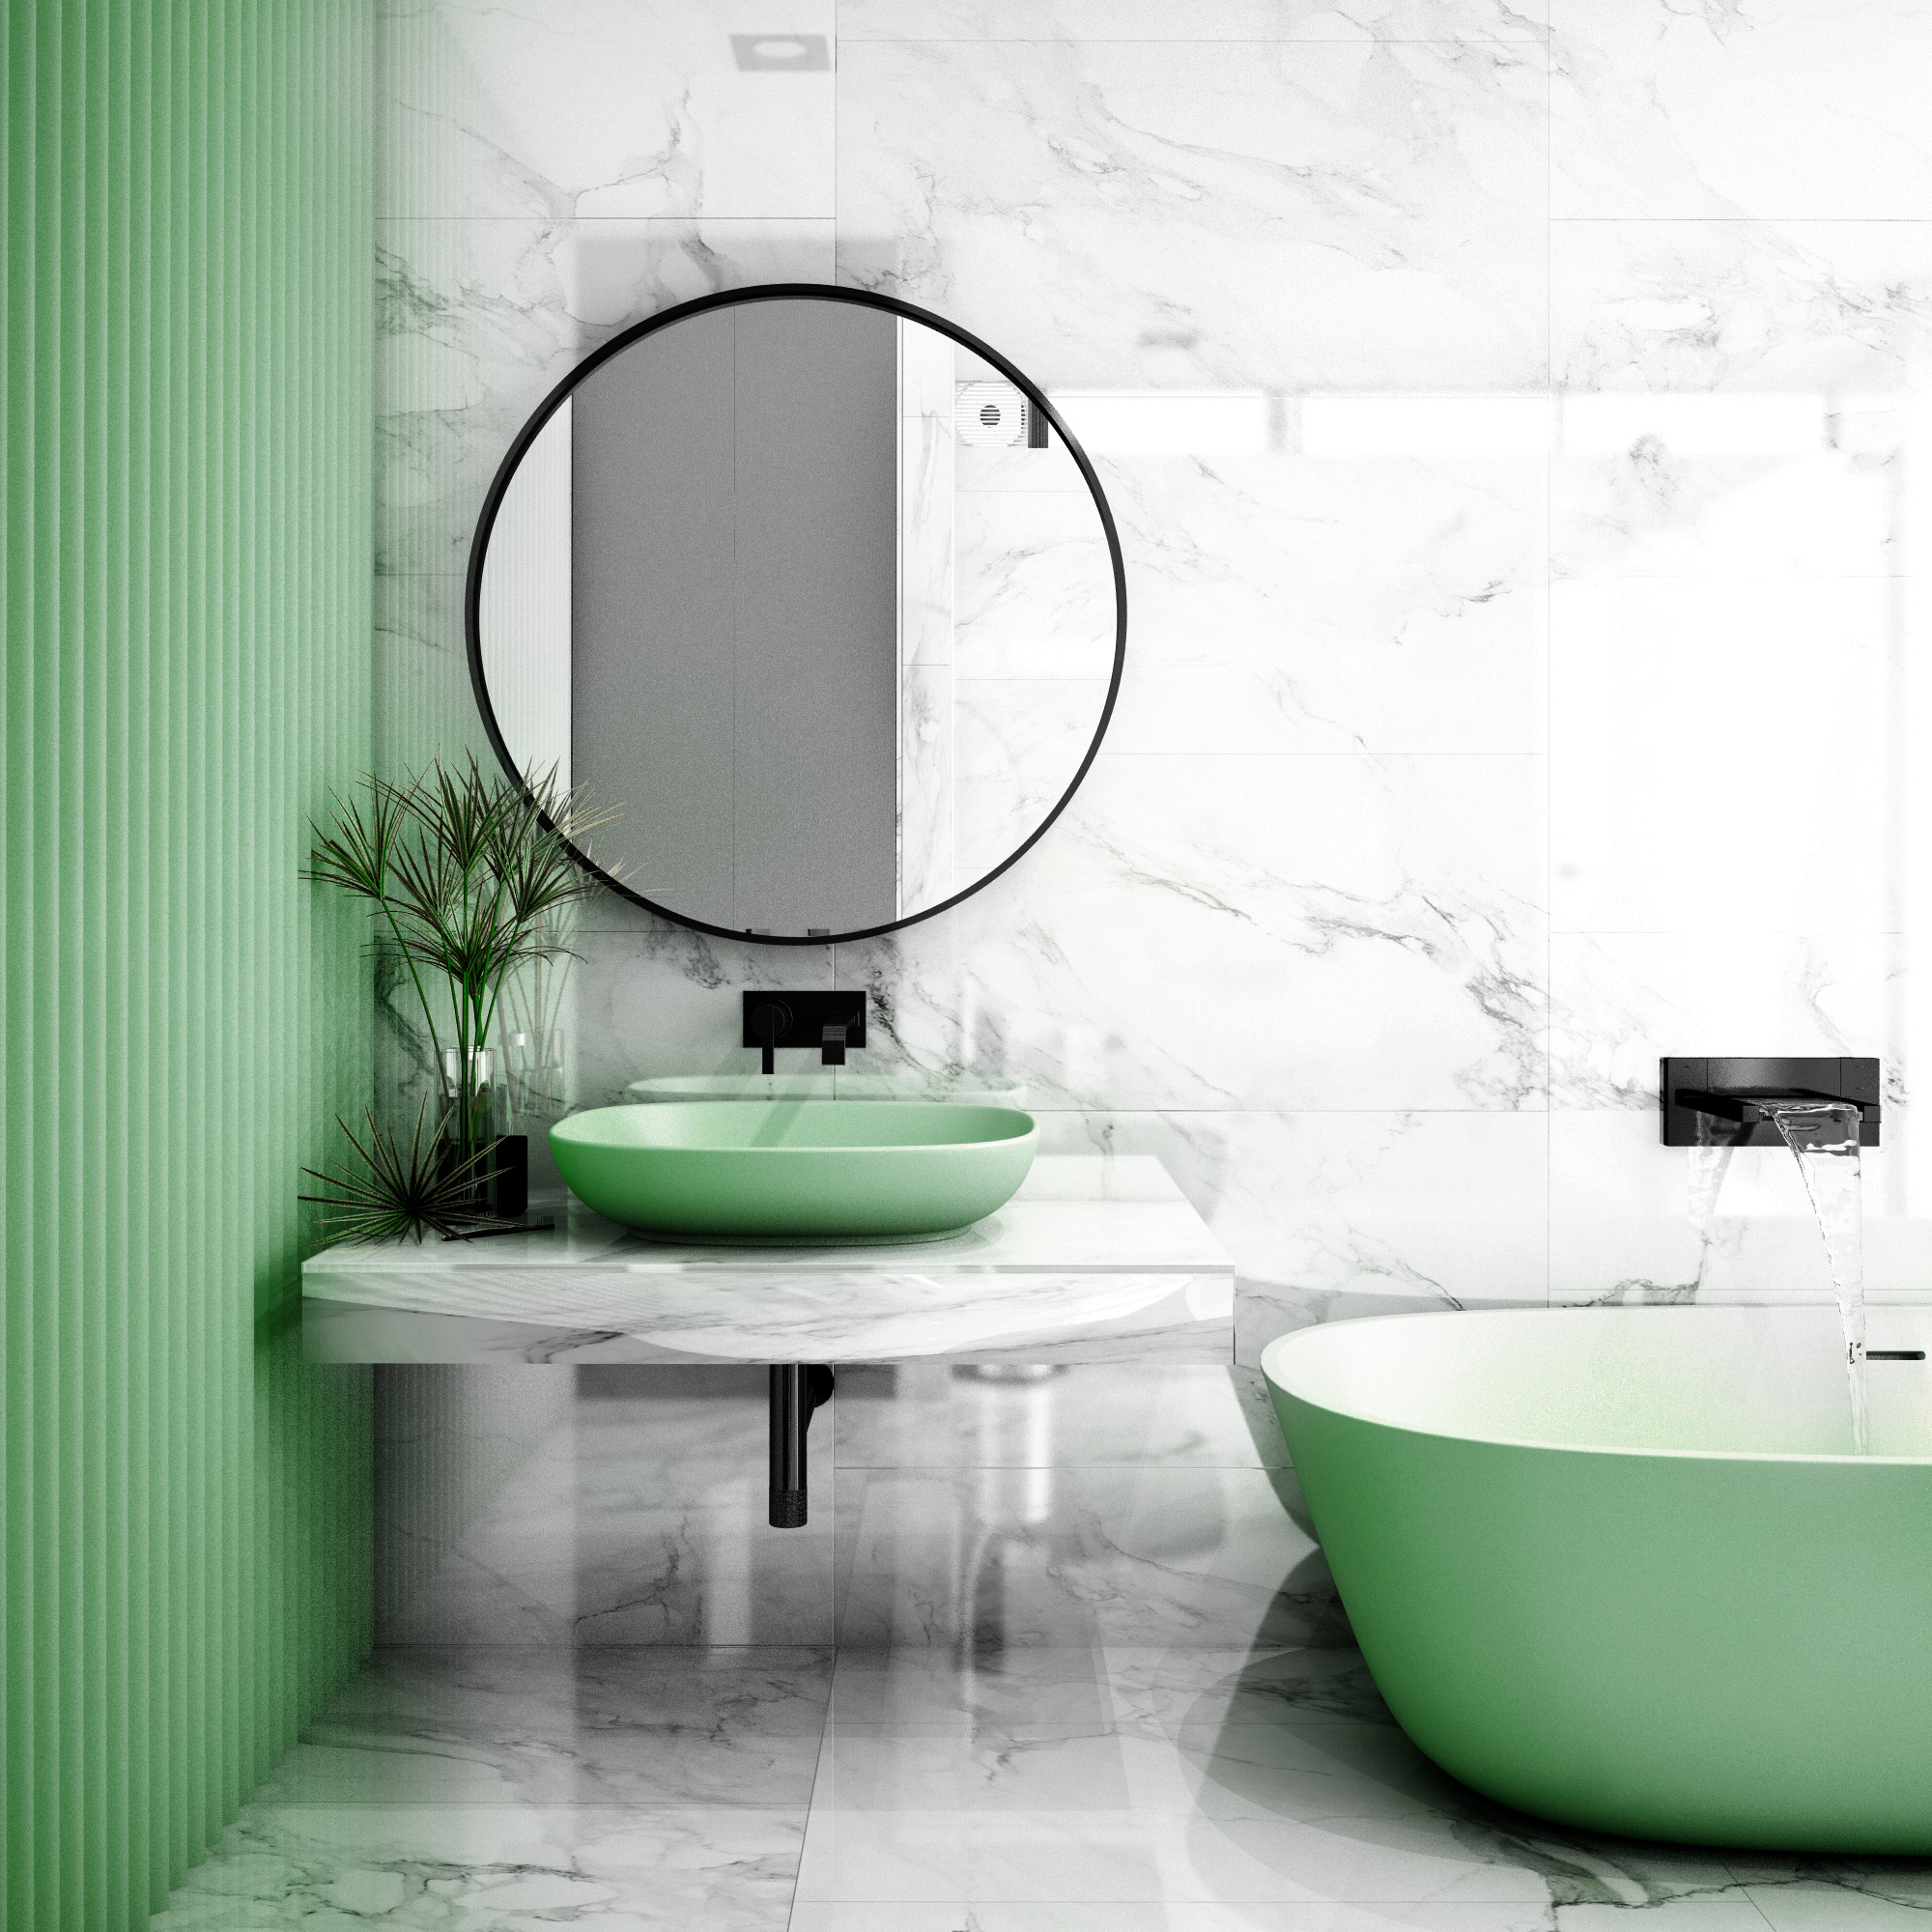 Light Green offers a calming, natural vibe for a peaceful bathroom ambiance.